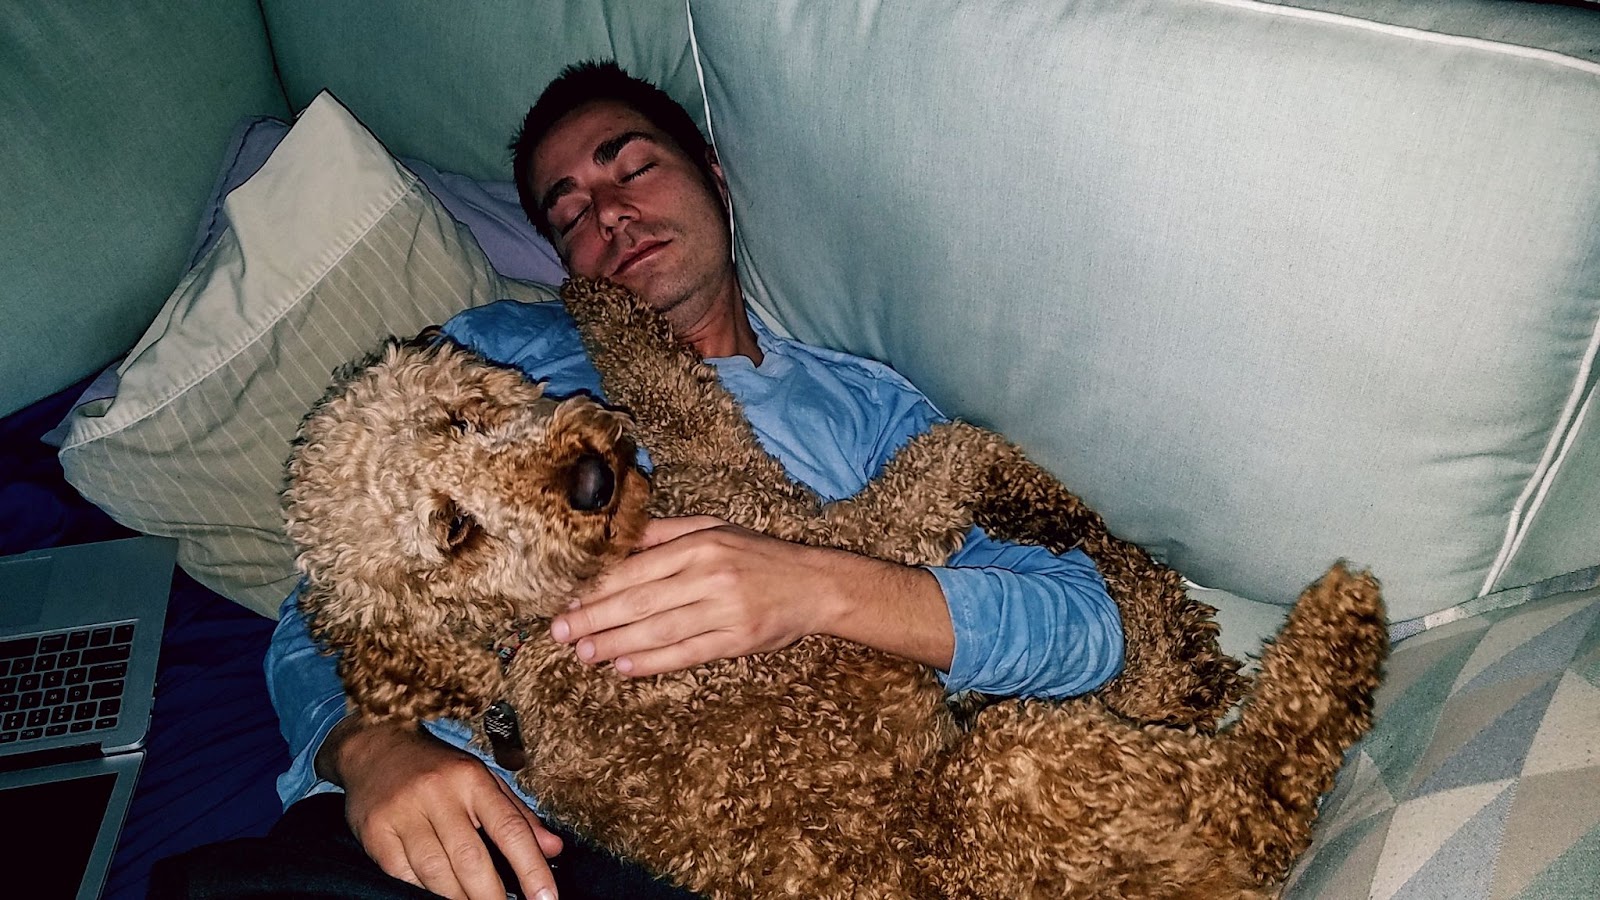 A man with dark hair and olive skin in a blue pajama top sleeps on a white couch with a honey-colored fluffy curly poodle lying on his chest.